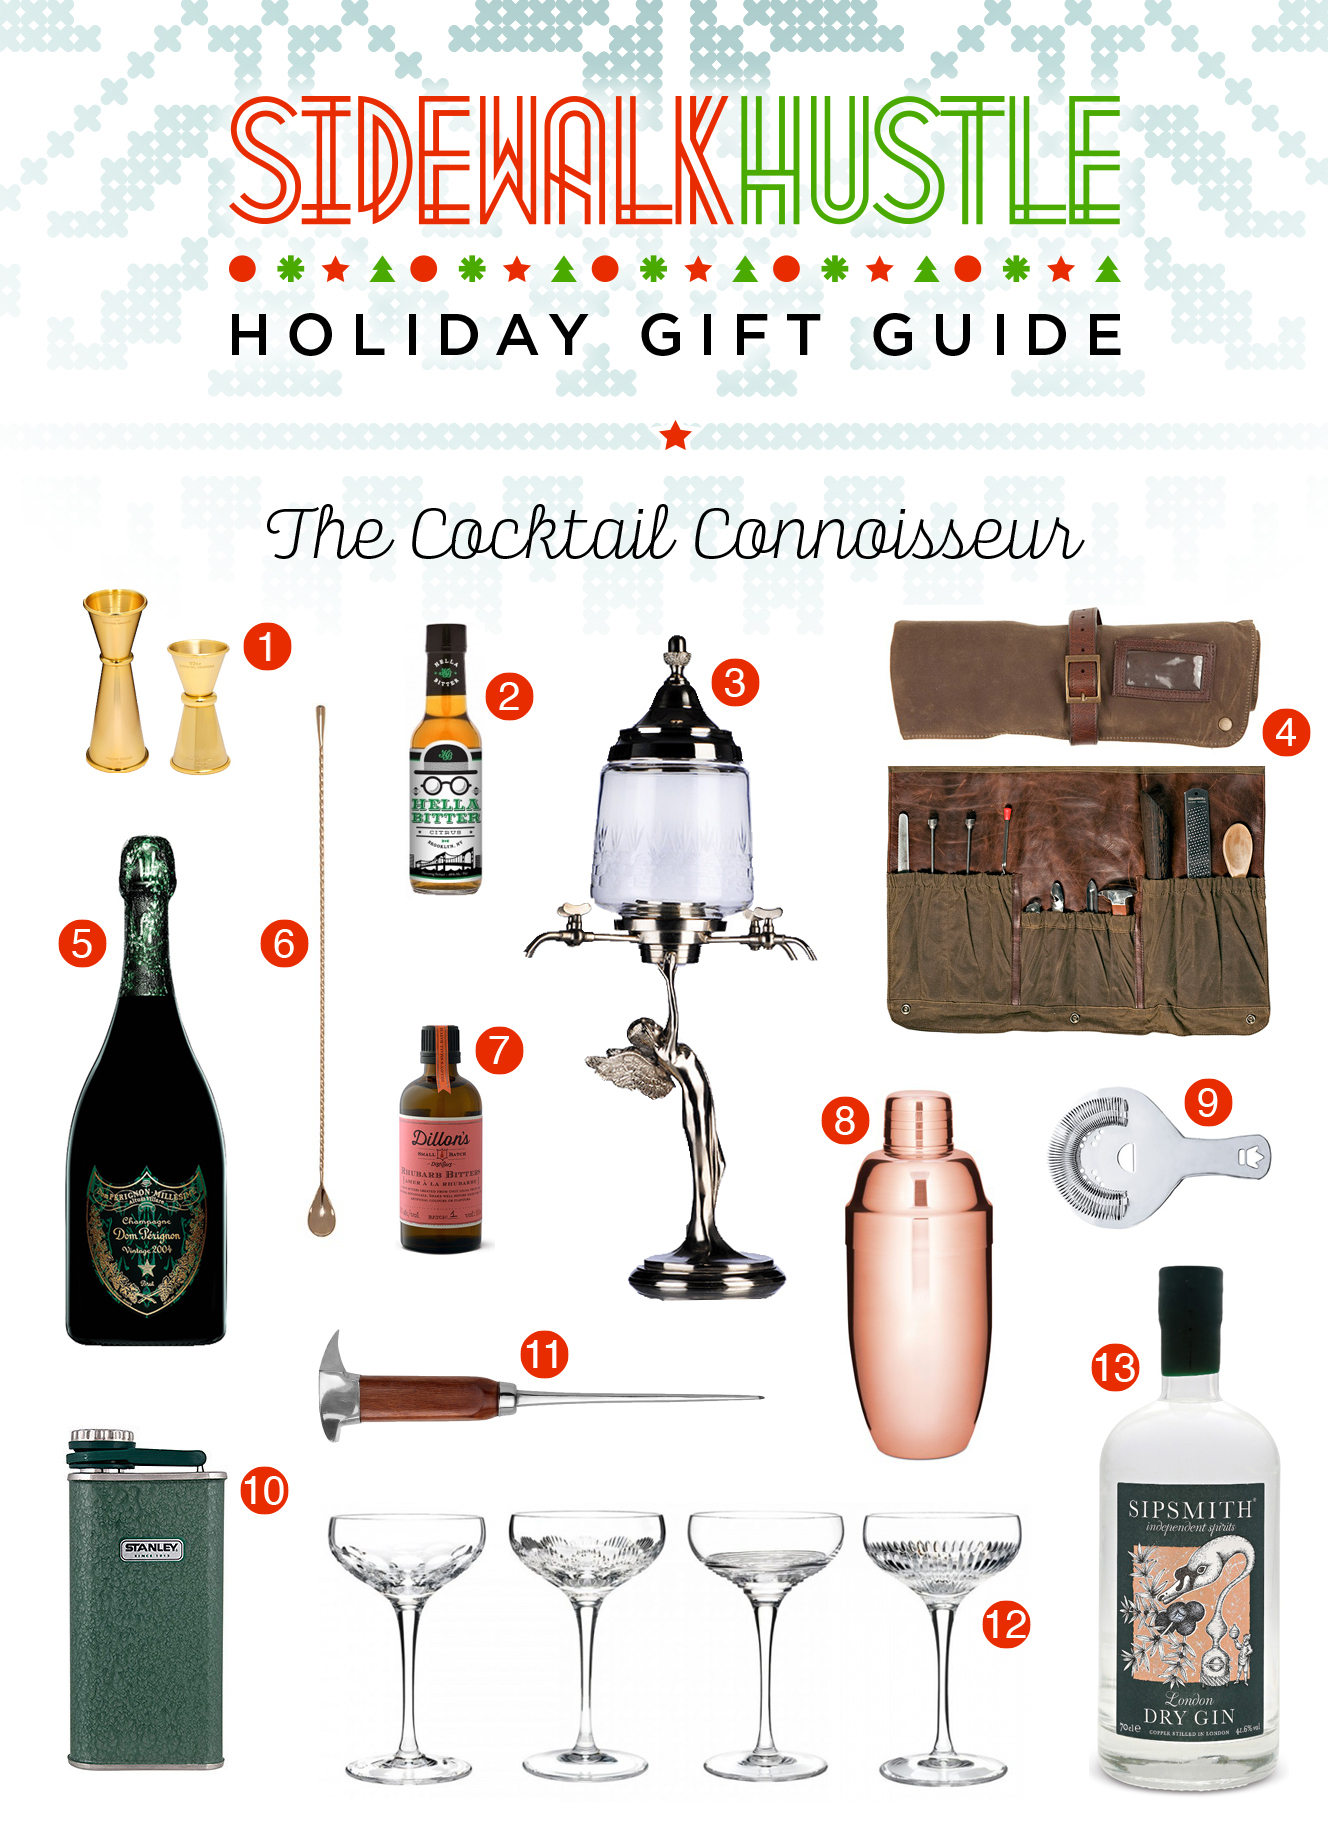 Cocktail Connoisseur Gift Guide 2014